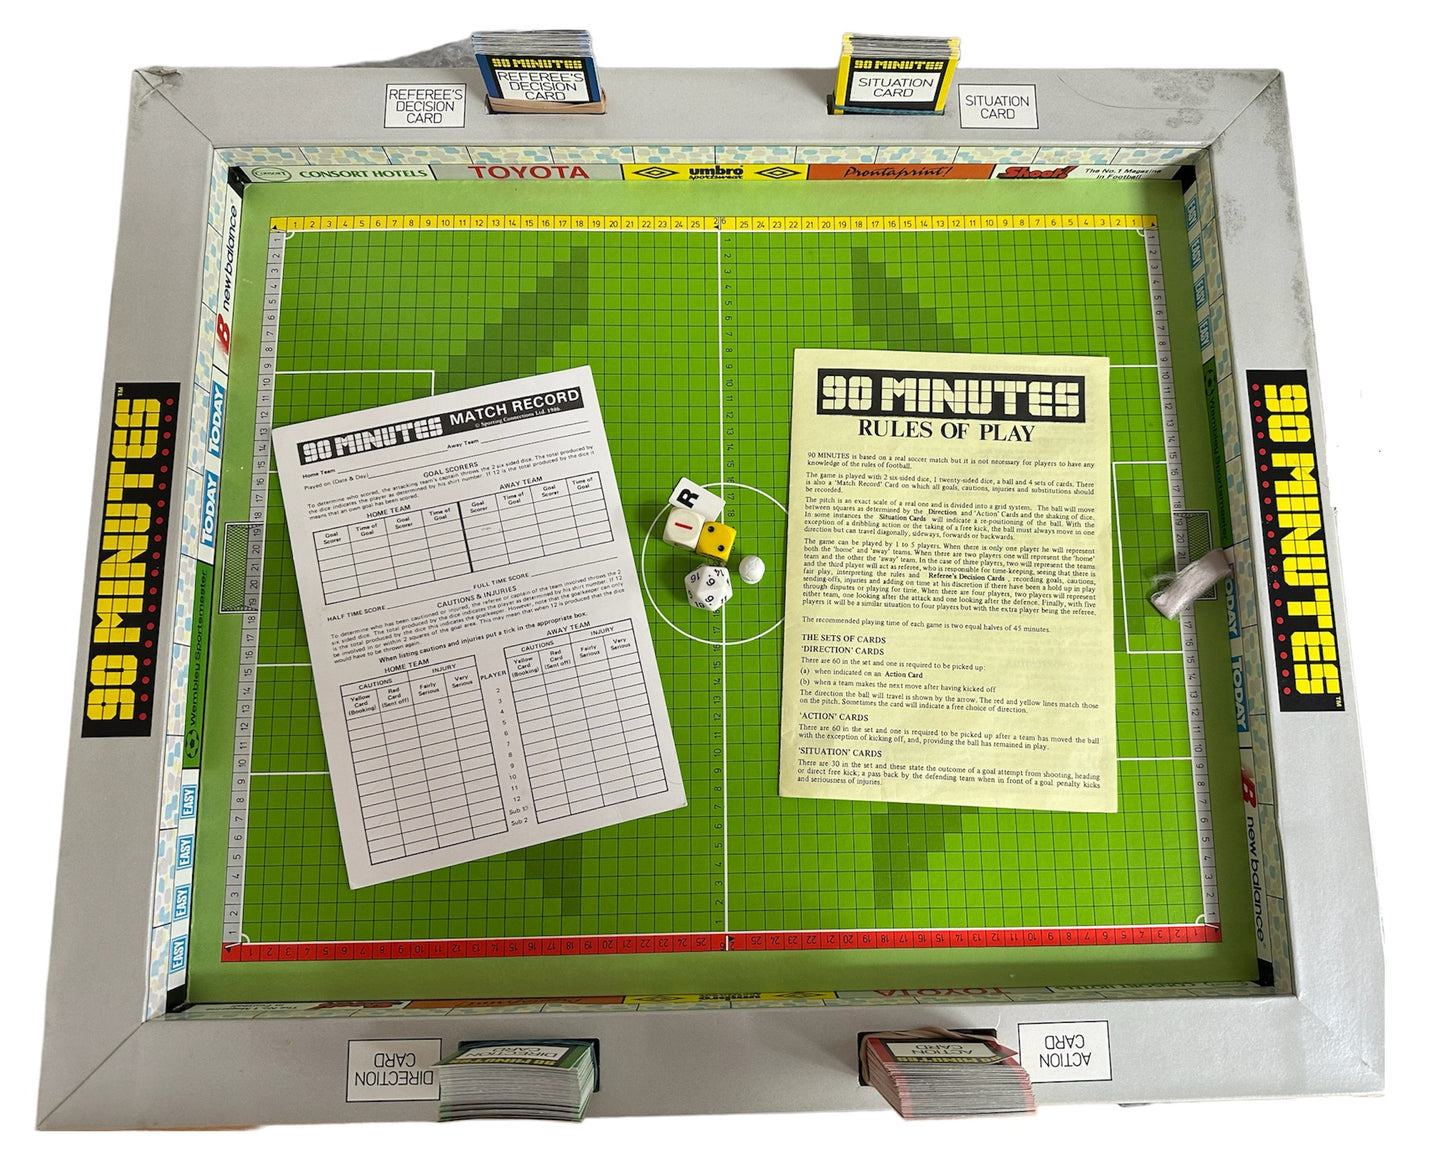 Sporting Connections 1986 - Bryan Robsons 90 Minutes Soccer Board Game - All The Thrills Of Real Soccer Packed Into A Board Game - Fantastic Condition 100% Complete In The Original Box